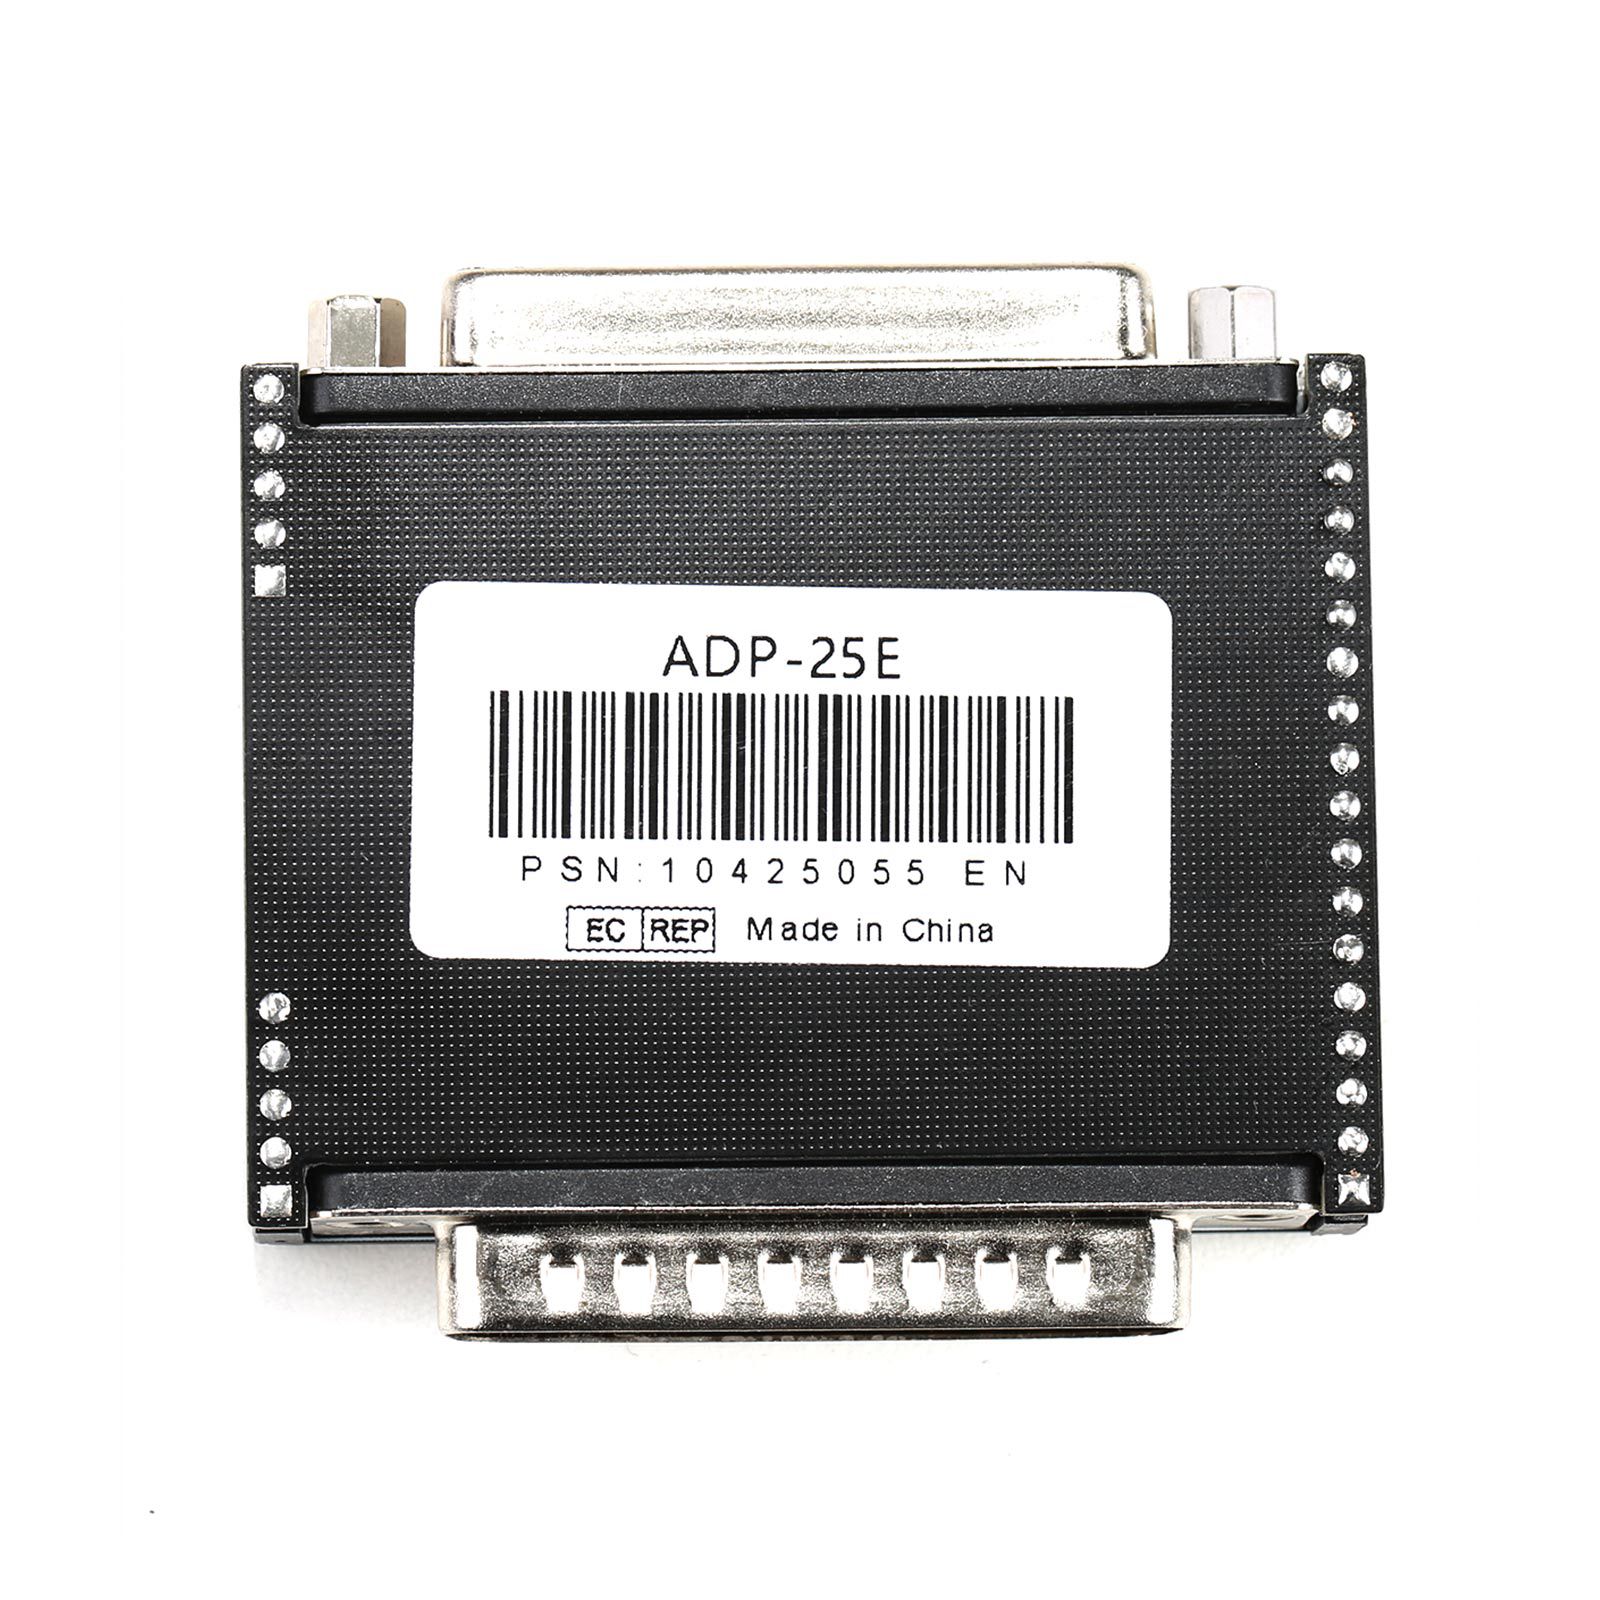  Lonsdor Super ADP 8A/4A Adapter for Toyota Lexus Proximity Key Programming Work With Lonsdor K518ISE K518S